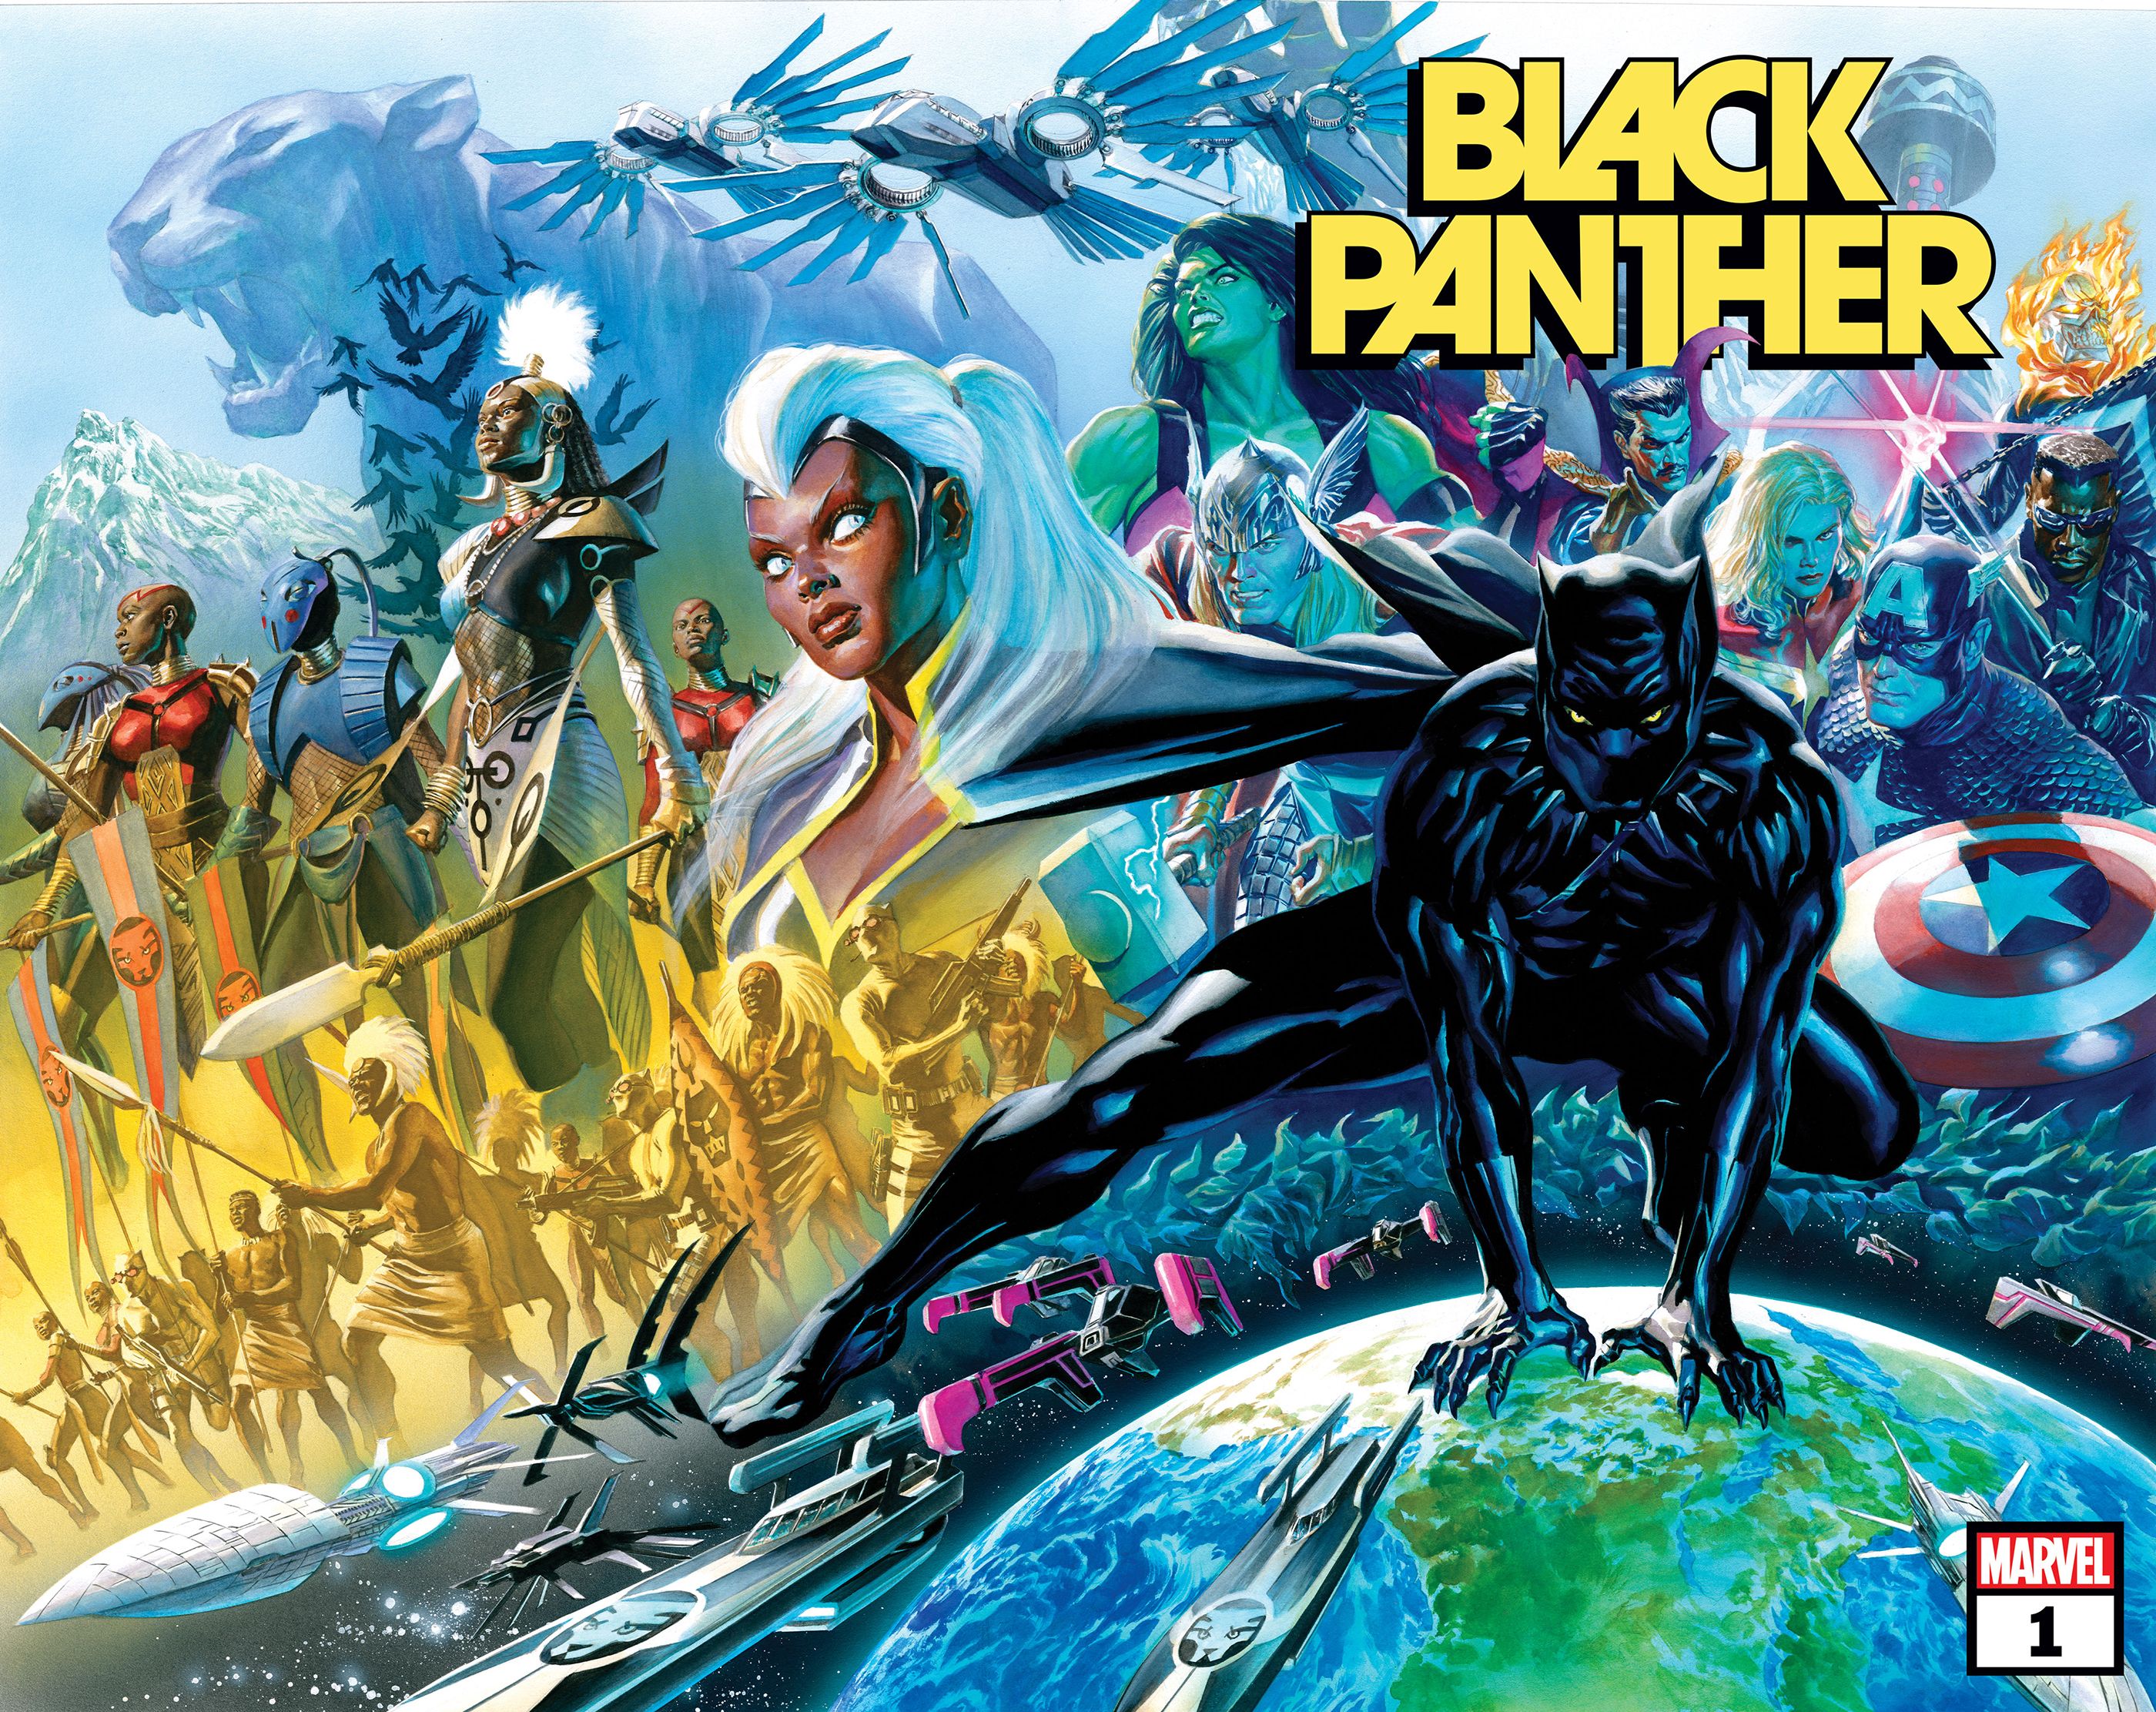 The Alex Ross cover for Black Panther #1.